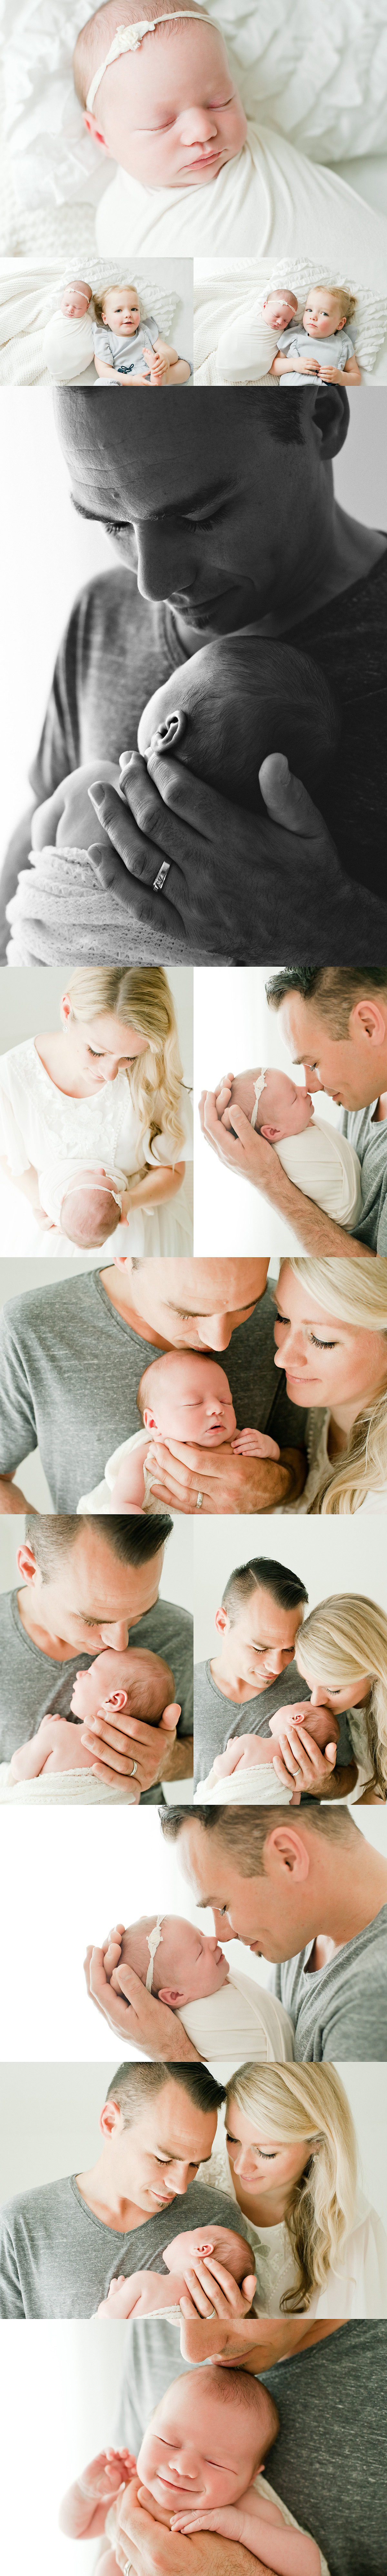 baby girl in parents arms during newborn photography session